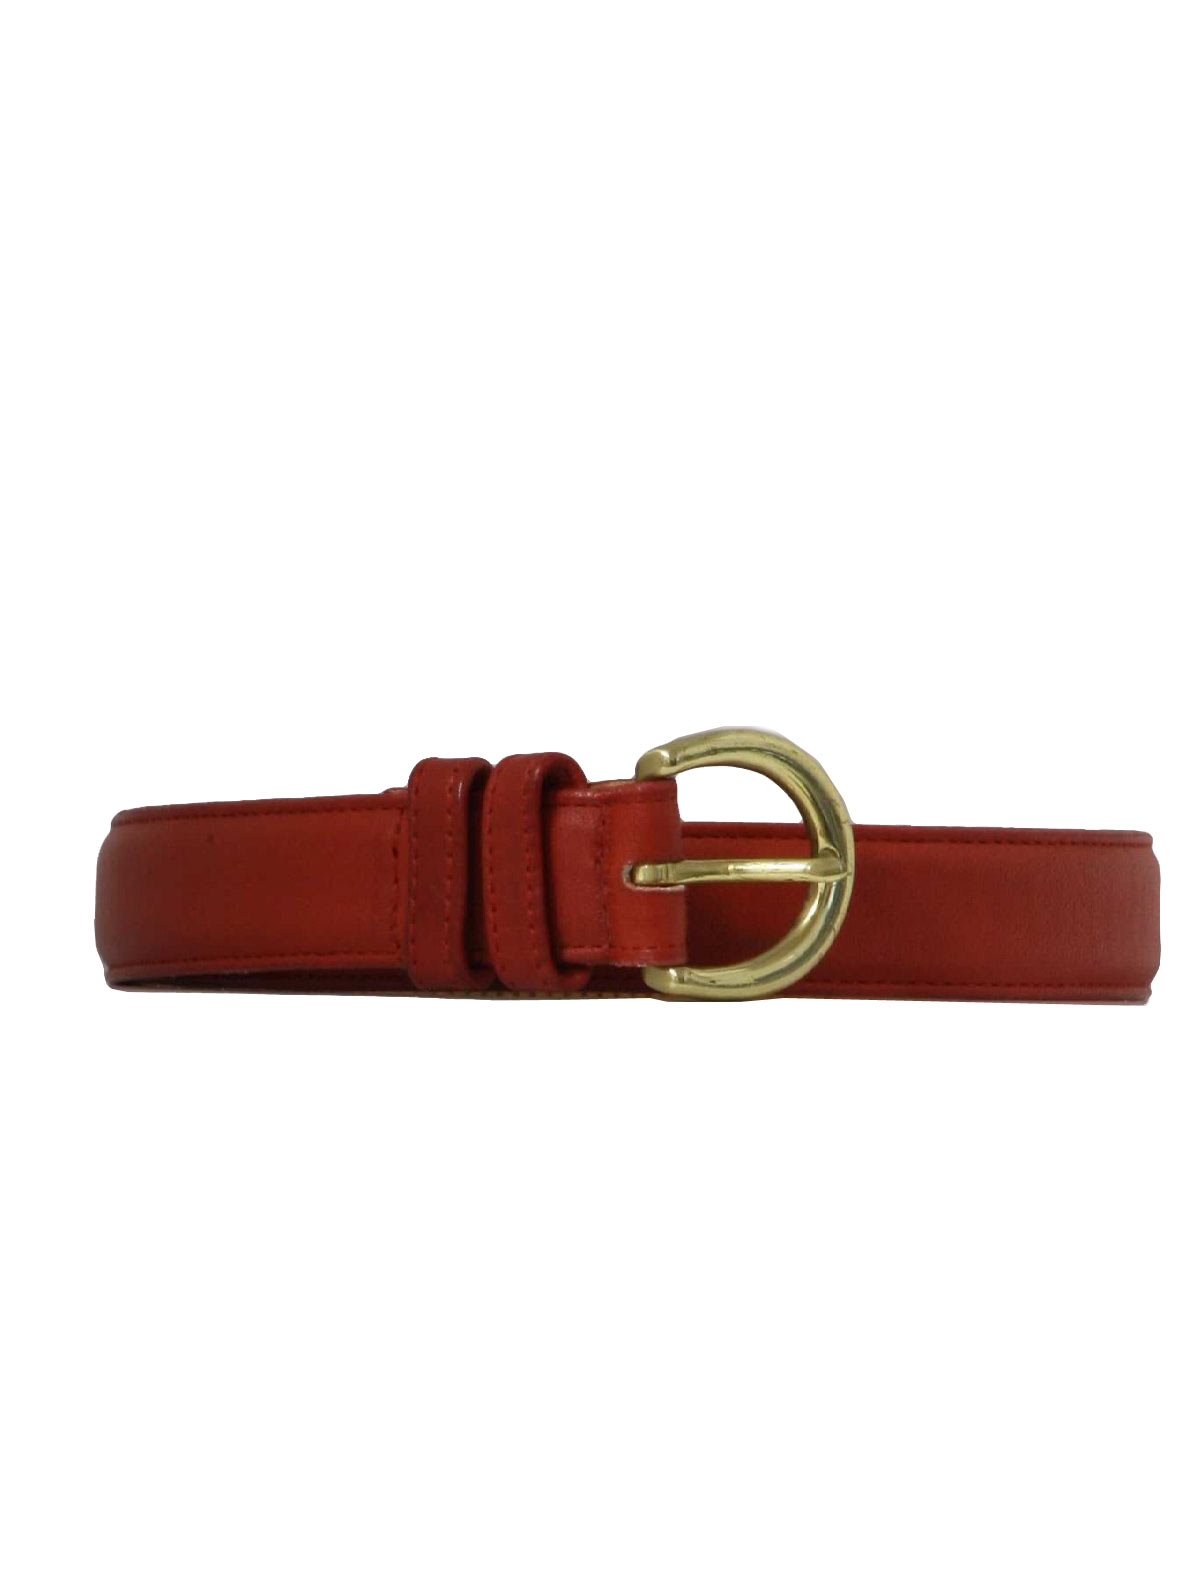 90's Coach Belt: 90s -Coach- Designer Womens red leather glove tanned ...